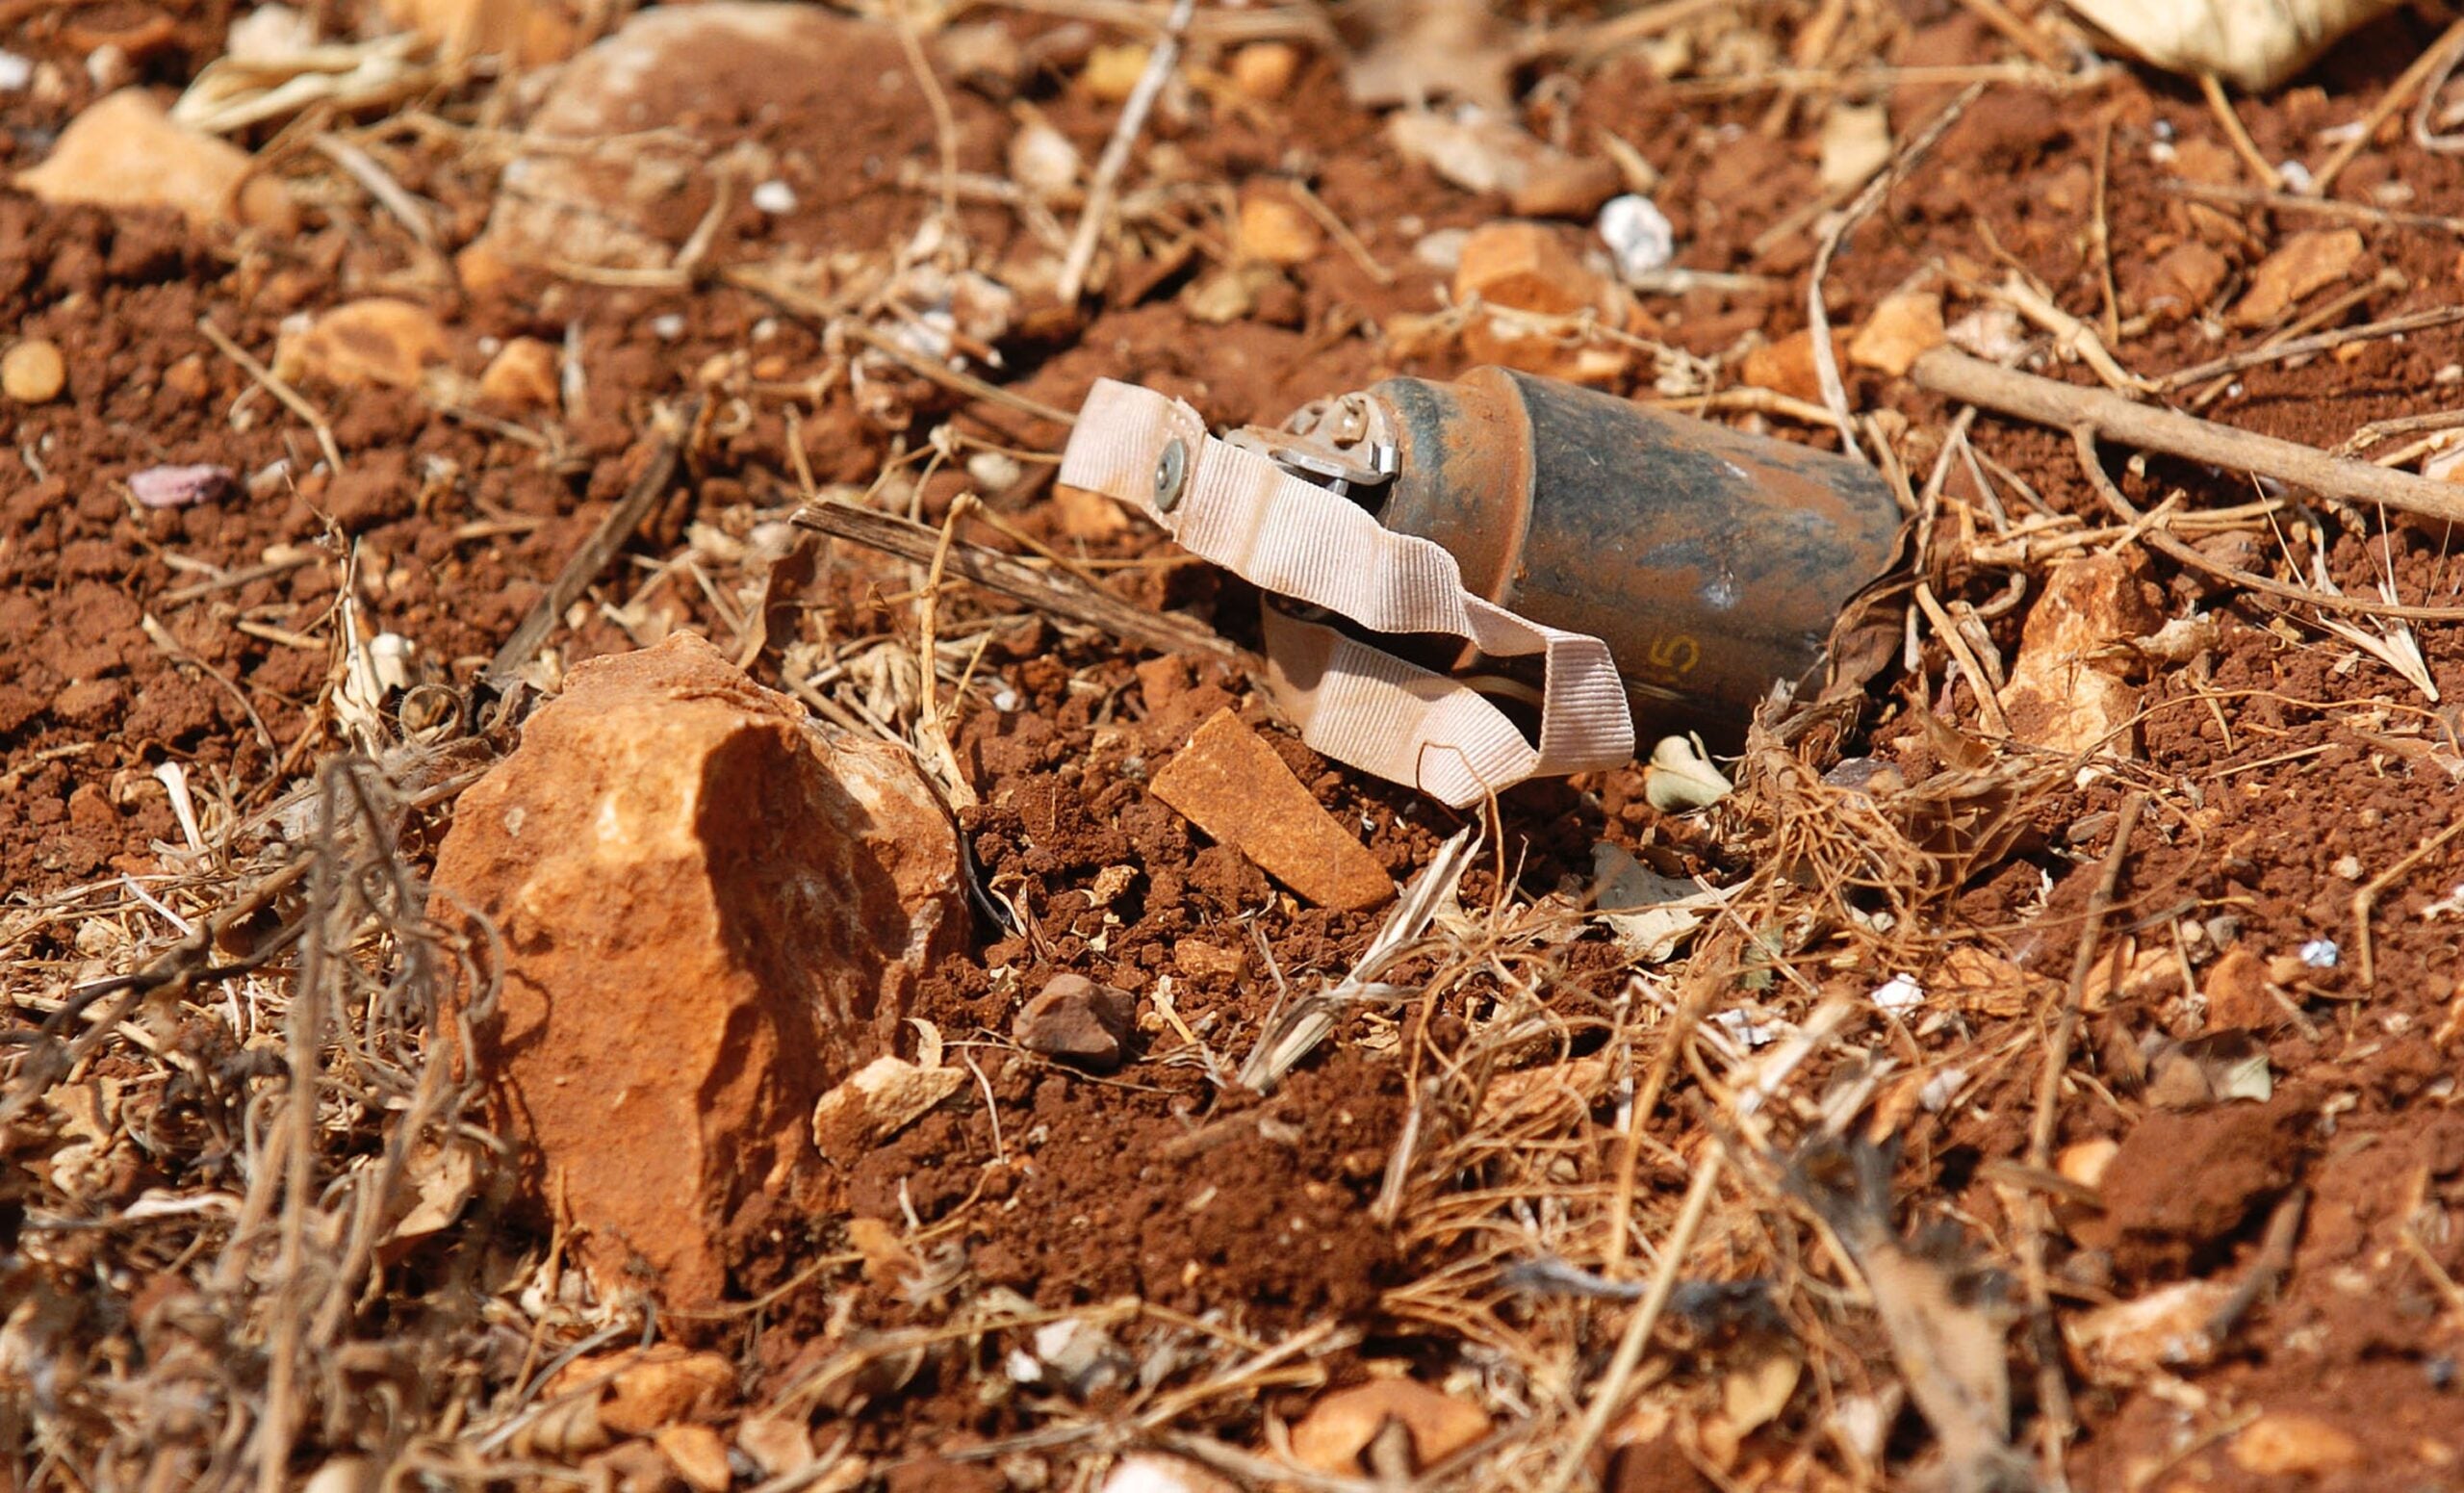 YOHMOR, LEBANON - AUGUST 21:  An unexploded cluster bomb identified by members of the Mine Advisory Group (MAG) rests in a backyard garden August 21, 2006 in Yohmor, Lebanon. MAG is clearing areas of dangerous unexploded submunitions in southern Lebanon that came under Isreali attack during incursions to dislodge Hezbollah fighters. According to the U.N., some 145  bomblets litter 10 identified areas where refugees are beginning to return to their homes.  (Photo by Scott Peterson/Getty Images)